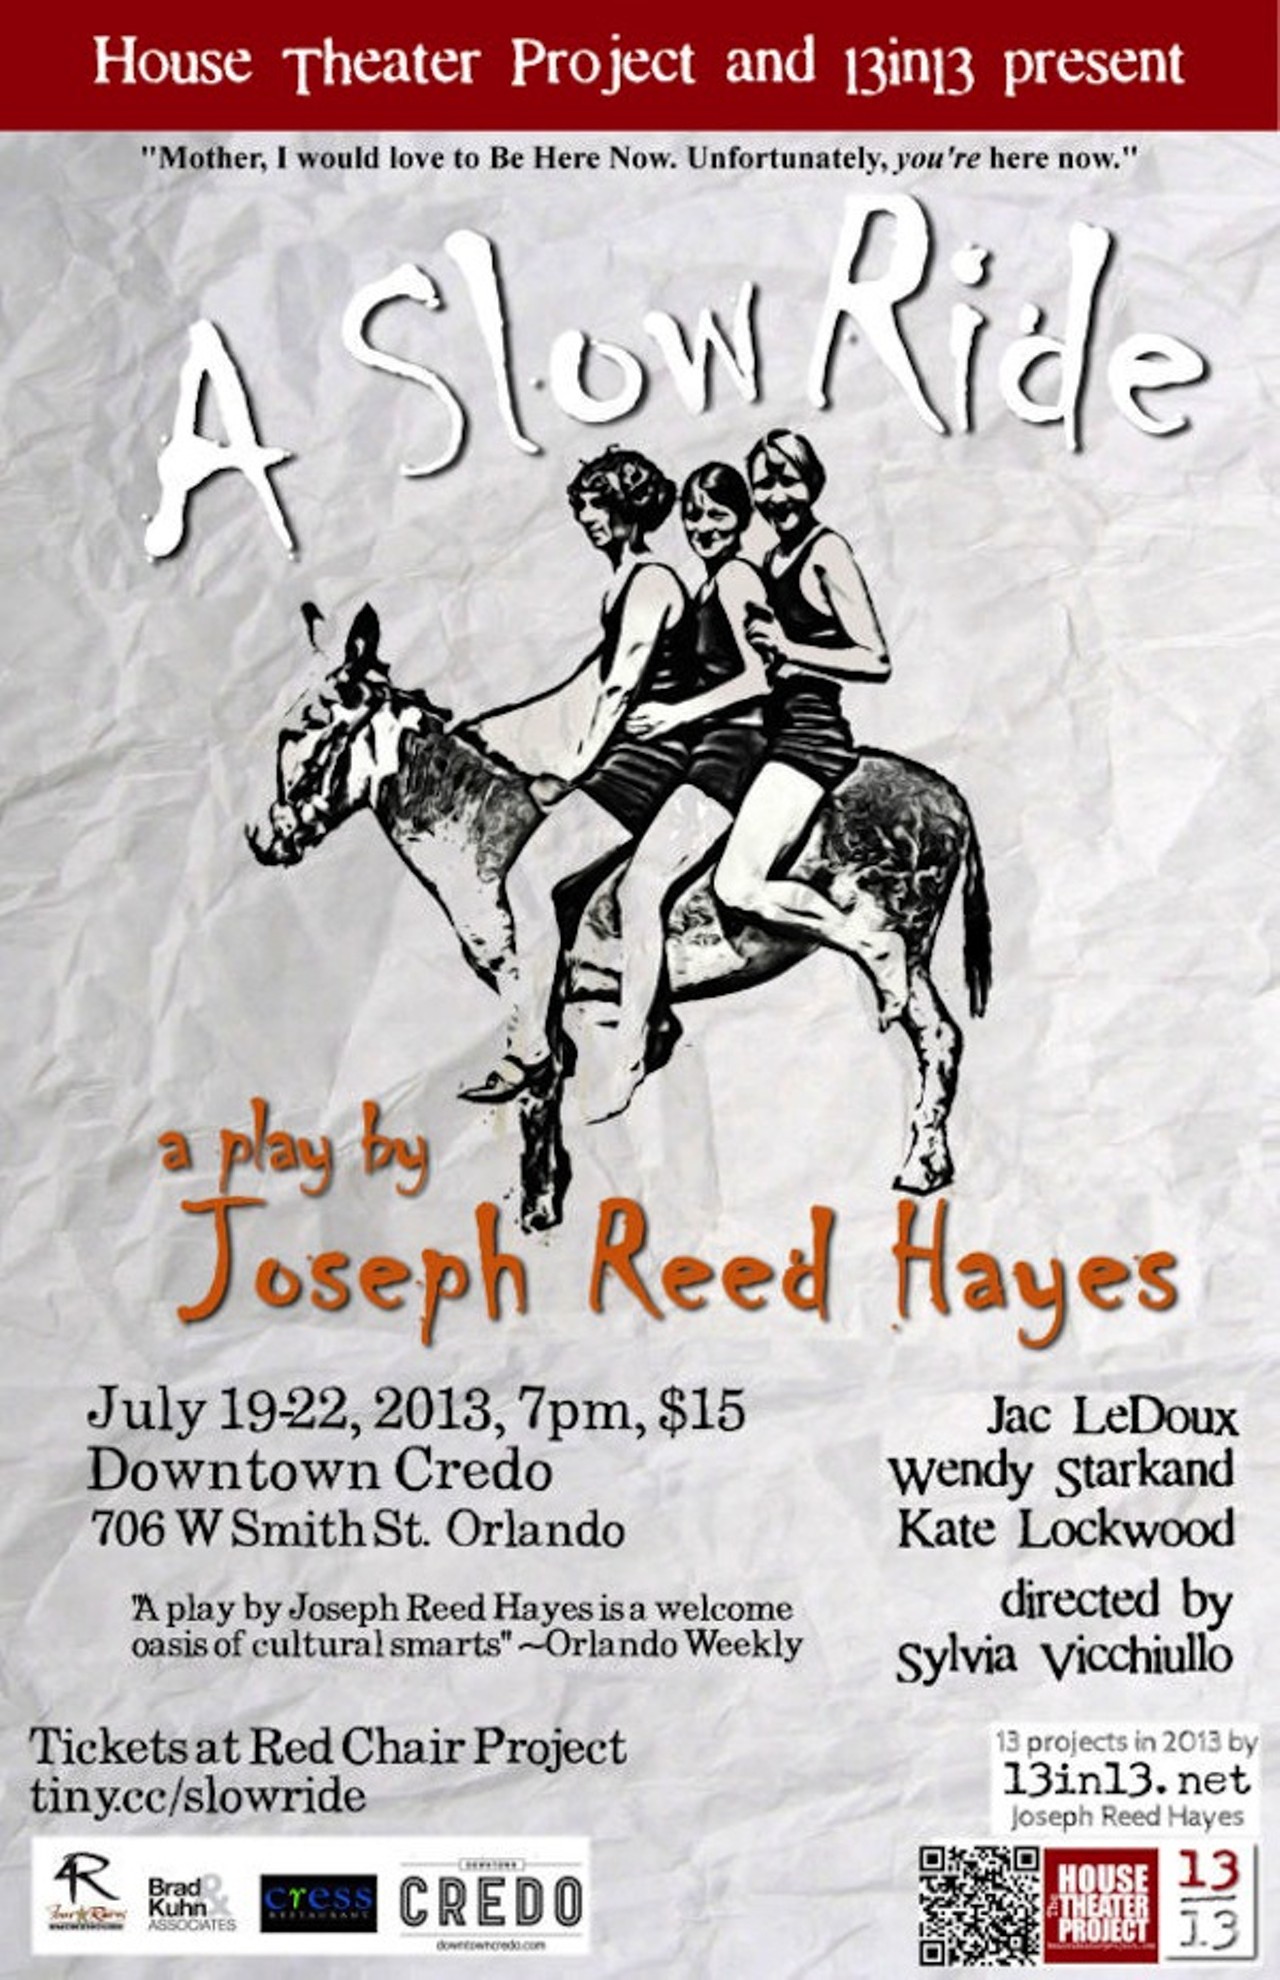 A Slow Ride
Friday-Monday, July 19-22
7 p.m.
Downtown Credo, 706 W. Smith St.
strikingly.com/aslowride
$12-$15
To twist a sentence of Tolstoy&#146;s, all happy families are alike, but every unhappy family bickers, snaps and snarls in its own unique way. Considering local playwright/event producer/restaurant critic Joseph Reed Hayes&#146; facility with language, the three women at the heart of his new play, A Slow Ride, are sure to quarrel with style. &#147;Tension, humor, affection and near-demented discord&#148; suffuse the hour-long one-act comedy, which Hayes stages live at College Park&#146;s Downtown Credo as the eighth event in his &#147;13 in 13&#148; initiative &#150; 13 artistic projects produced in 2013. The play has a brief run of just four performances, but one (Sunday night) will be live-streamed if you absolutely can&#146;t make it out of the house. Get all the details at Hayes&#146; website, jazzonedge.com/13in13. &#151; Jessica Bryce Young